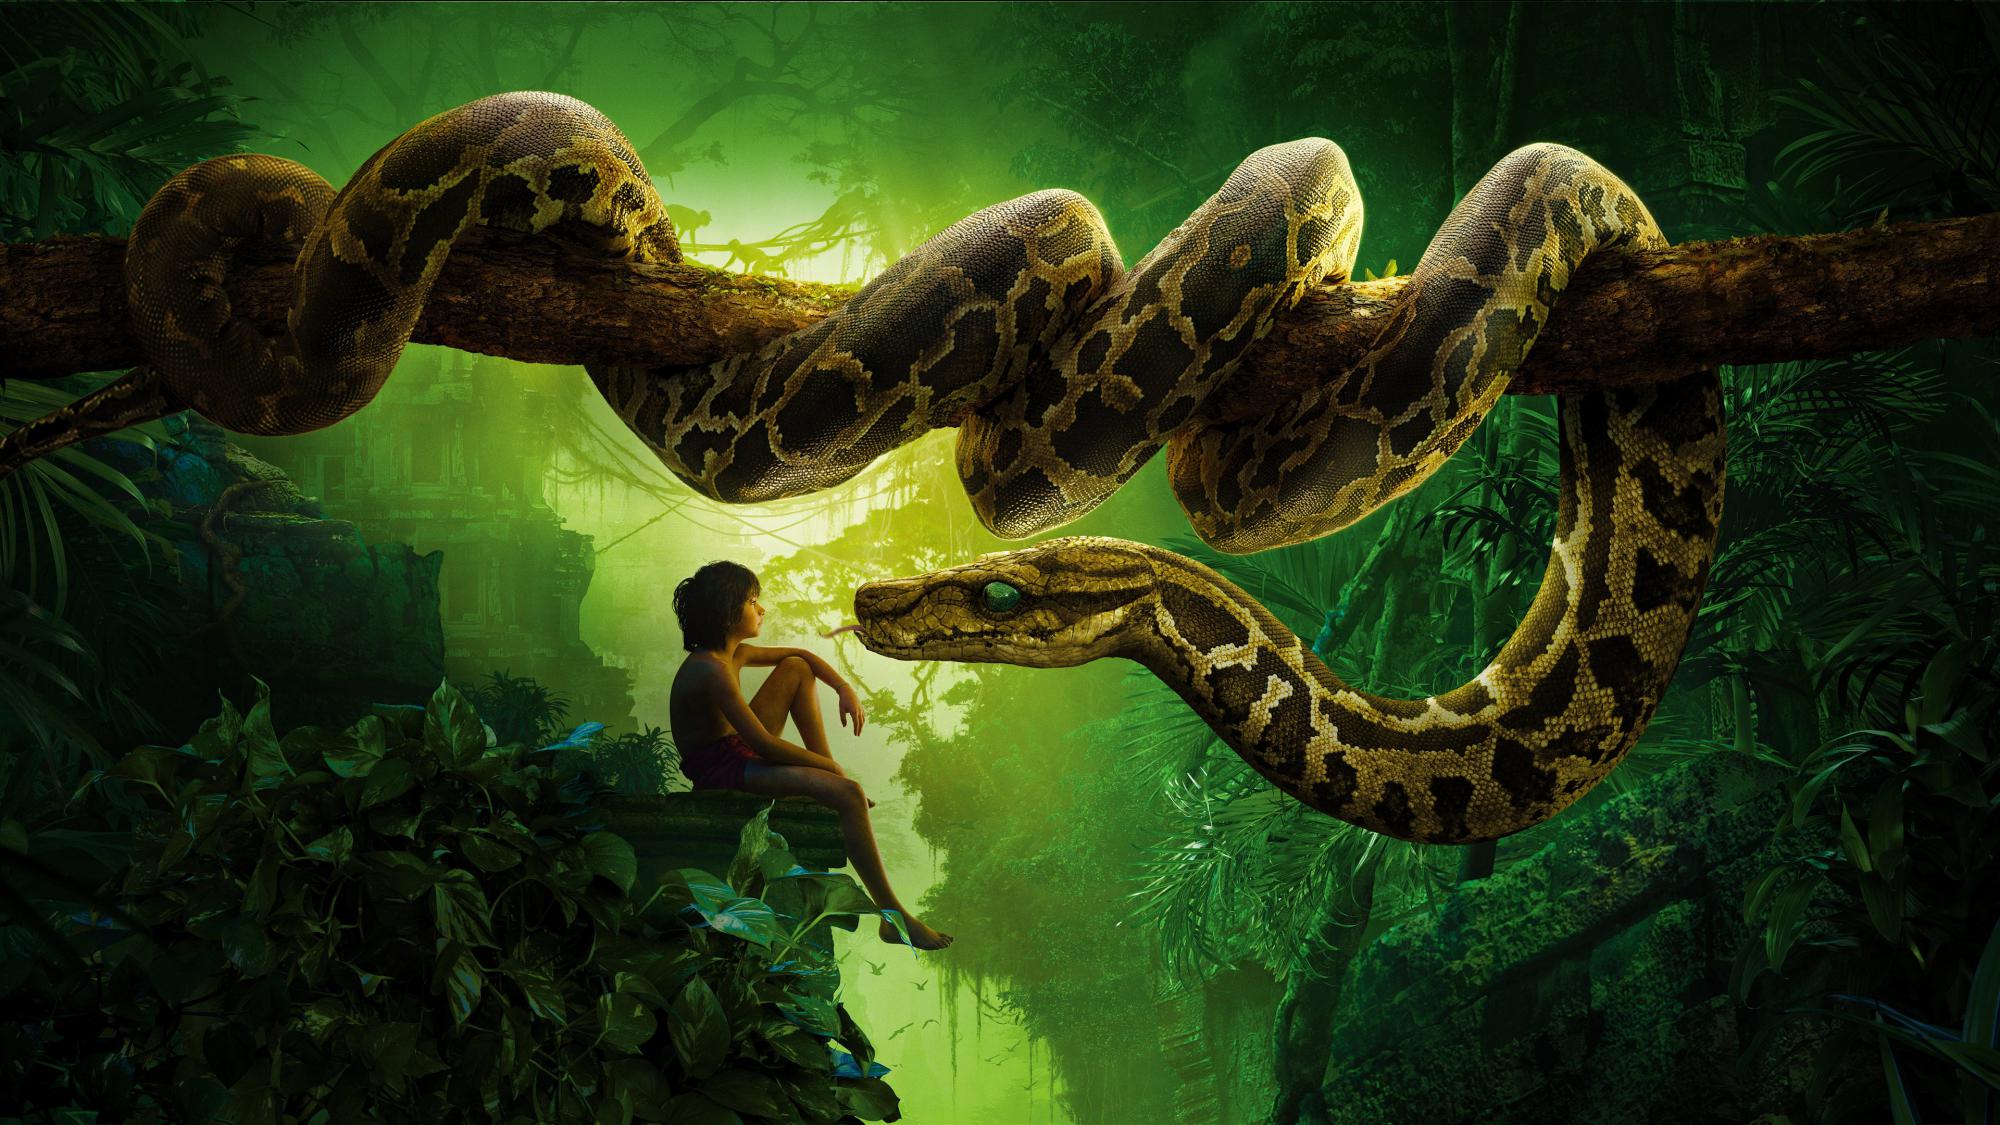 Backdrop Image for The Jungle Book